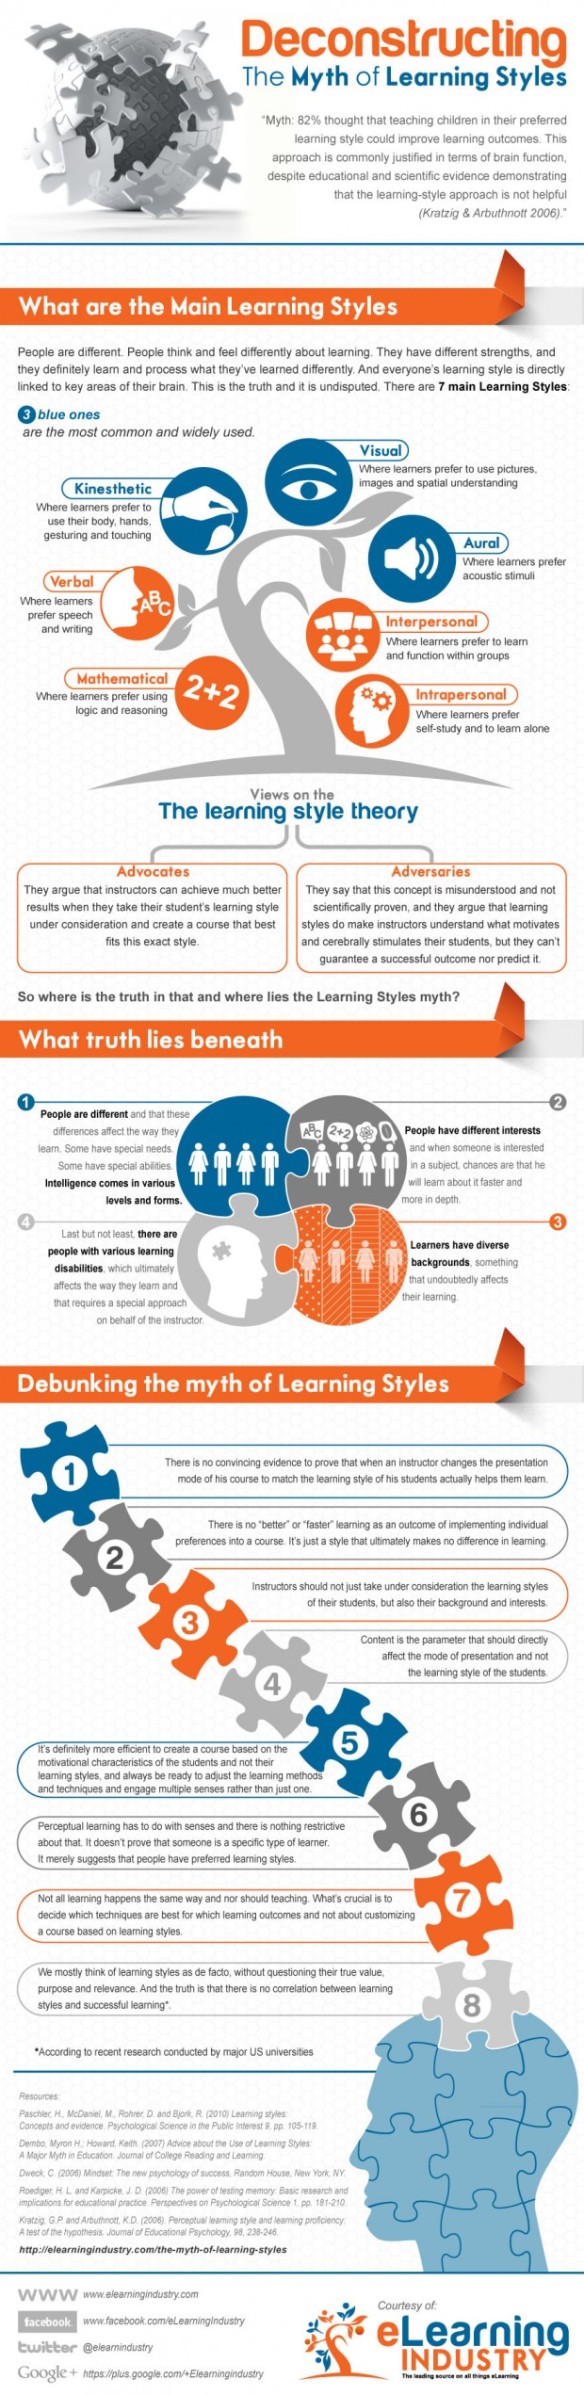 The-Myth-of-Learning-Styles-Infographic-620x2543